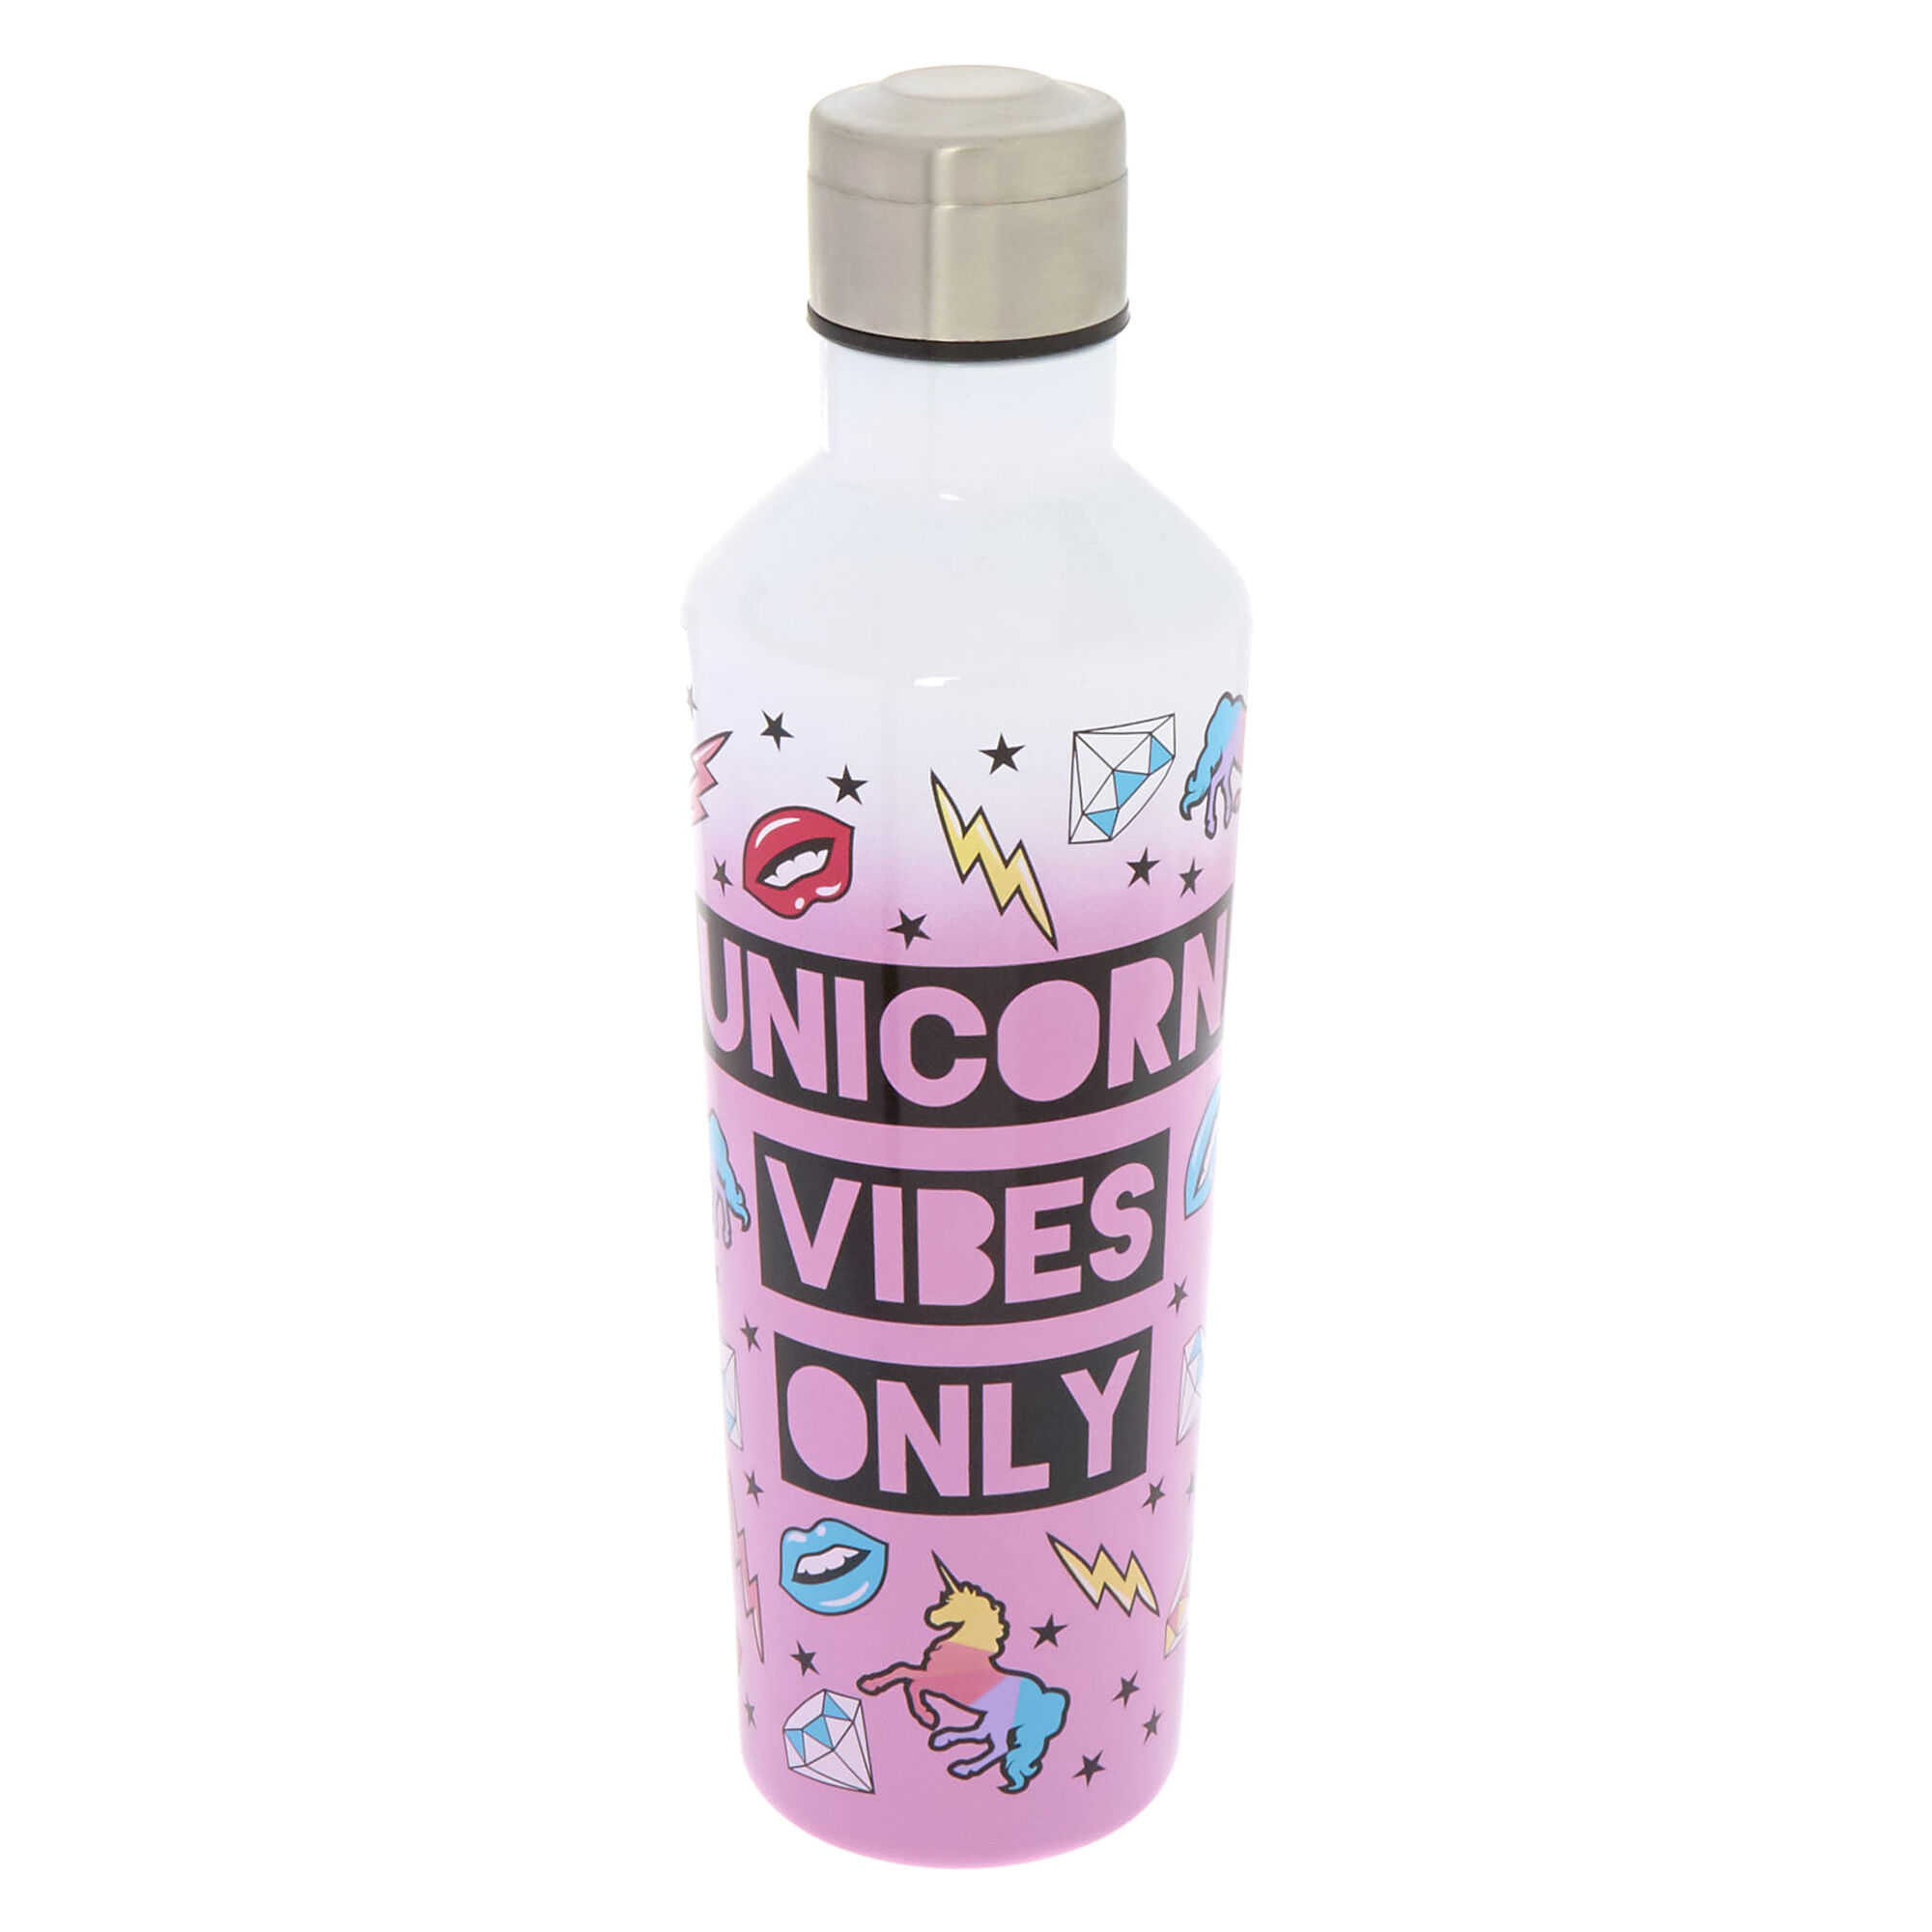 View Claires Unicorn Vibes Only Stainless Steel Water Bottle White information